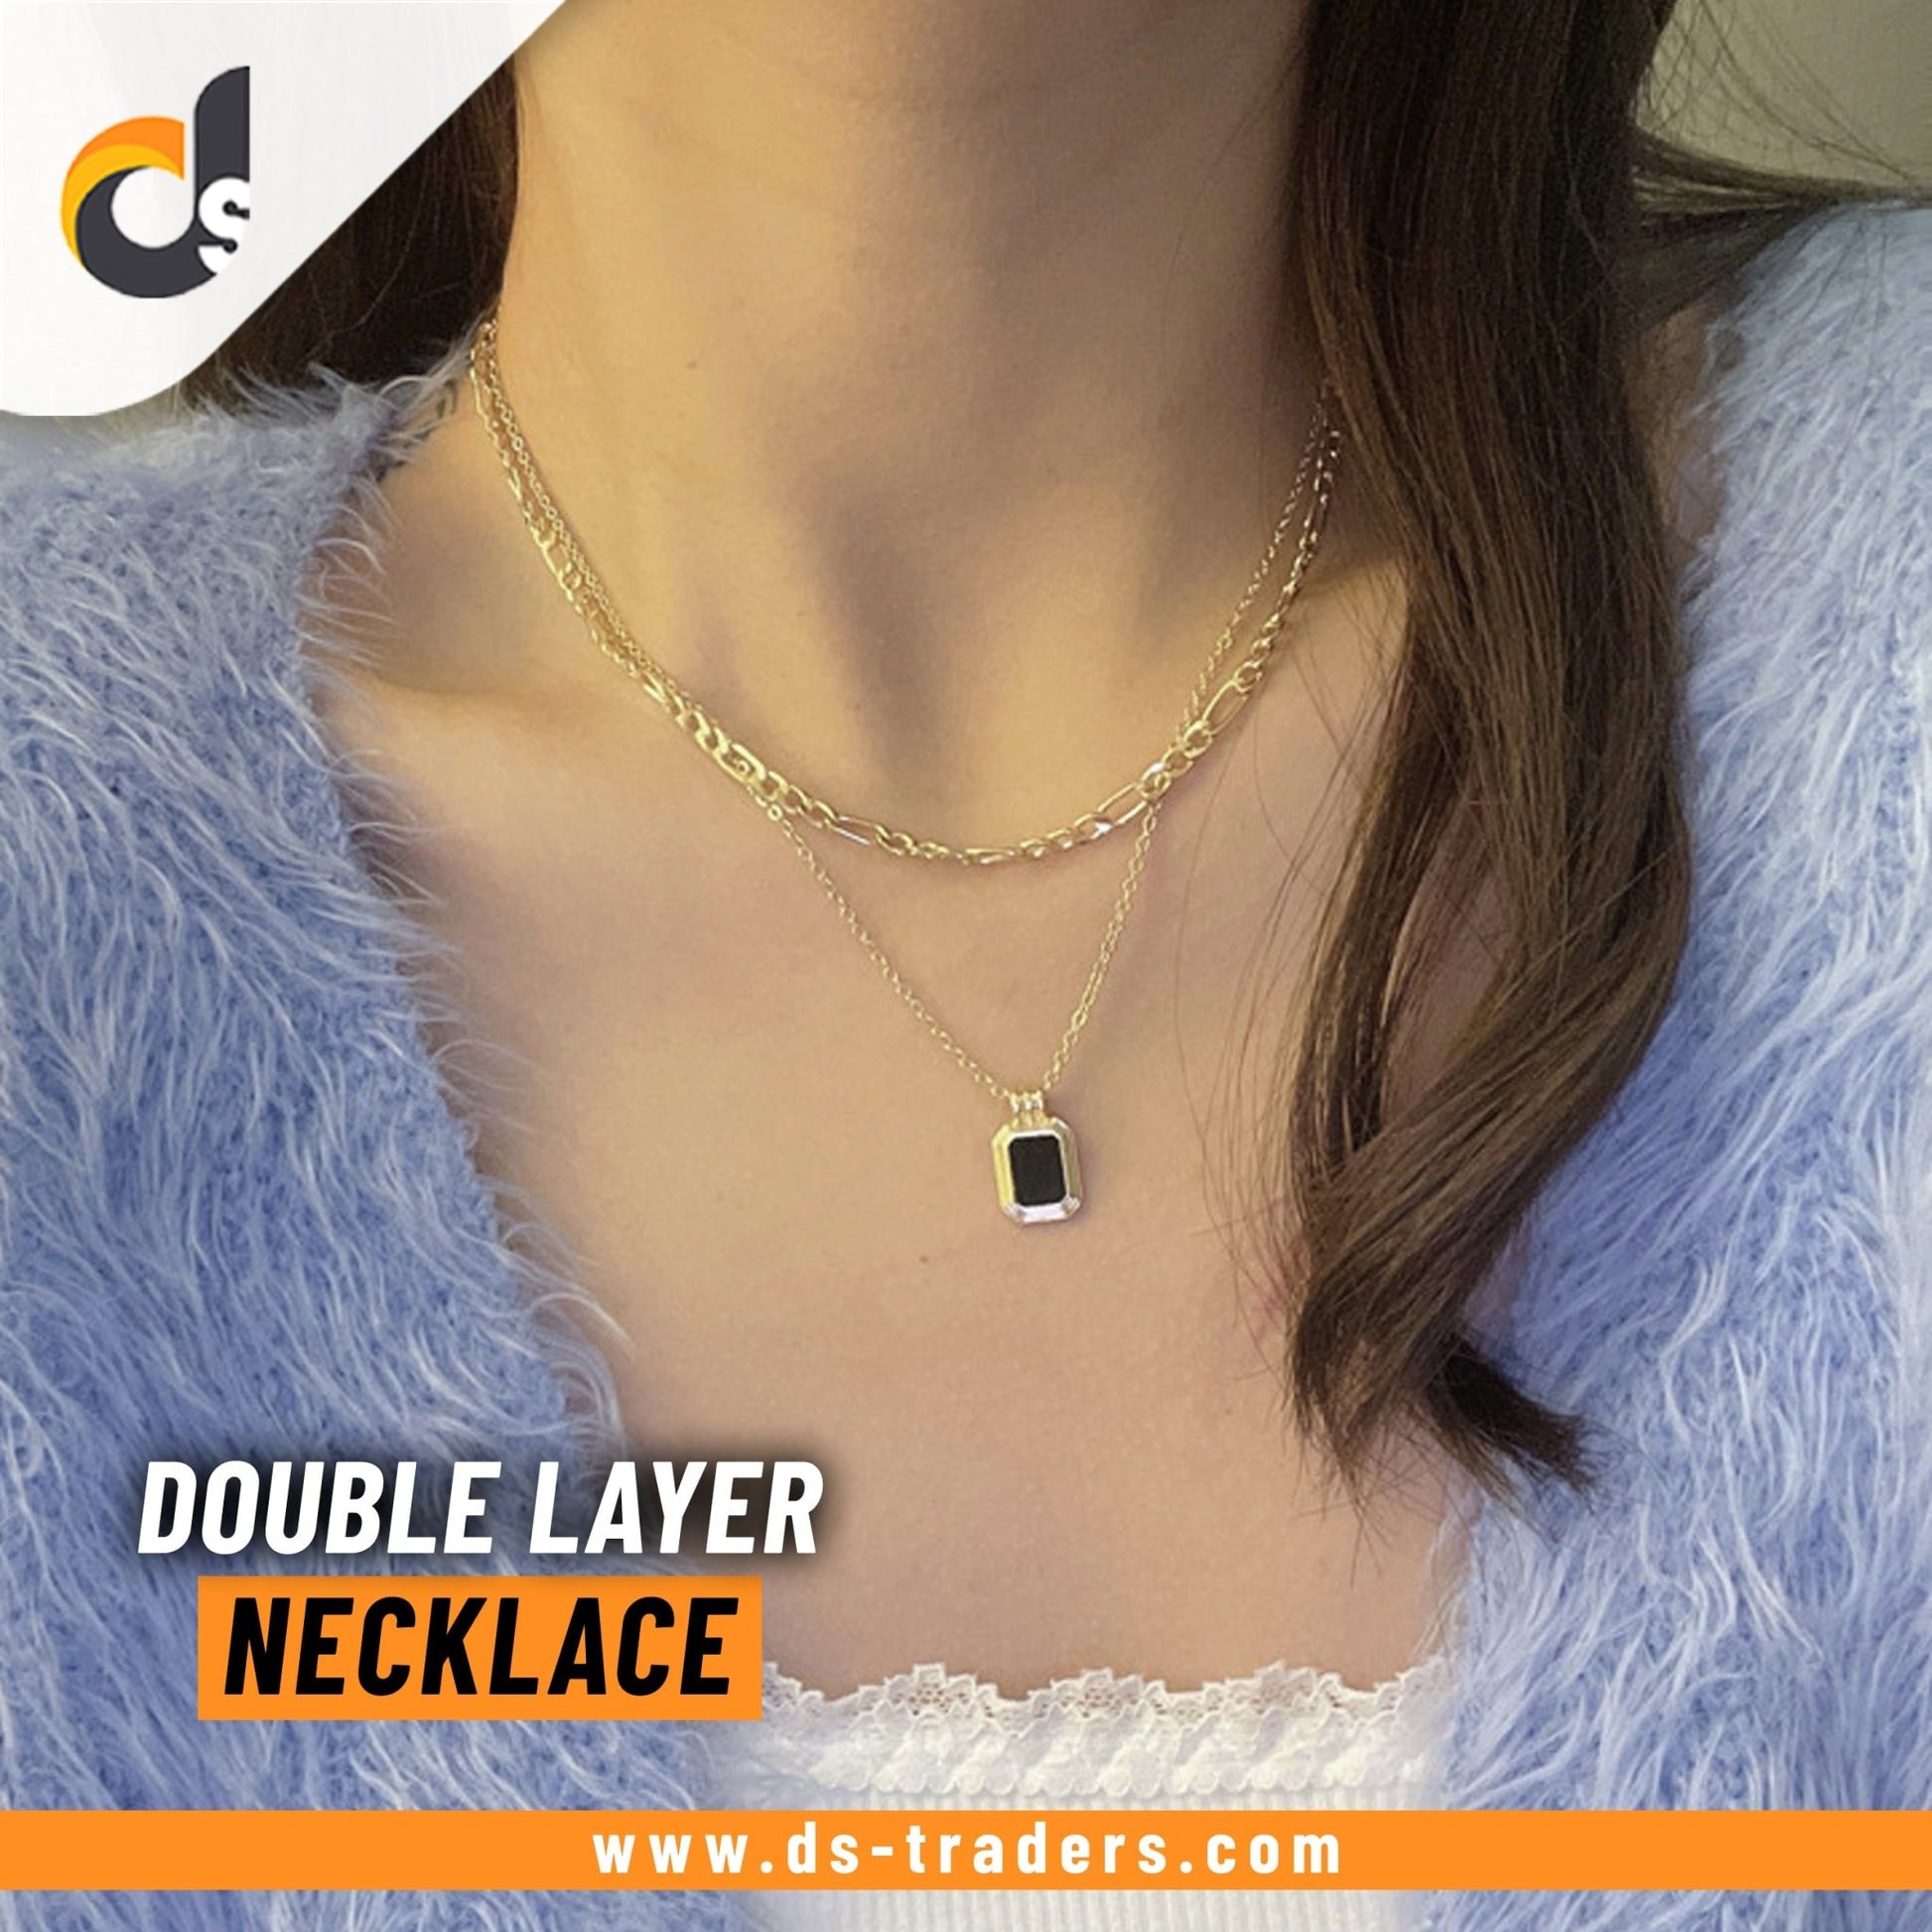 Black Color Double Layer Square Design Necklace - DS Traders